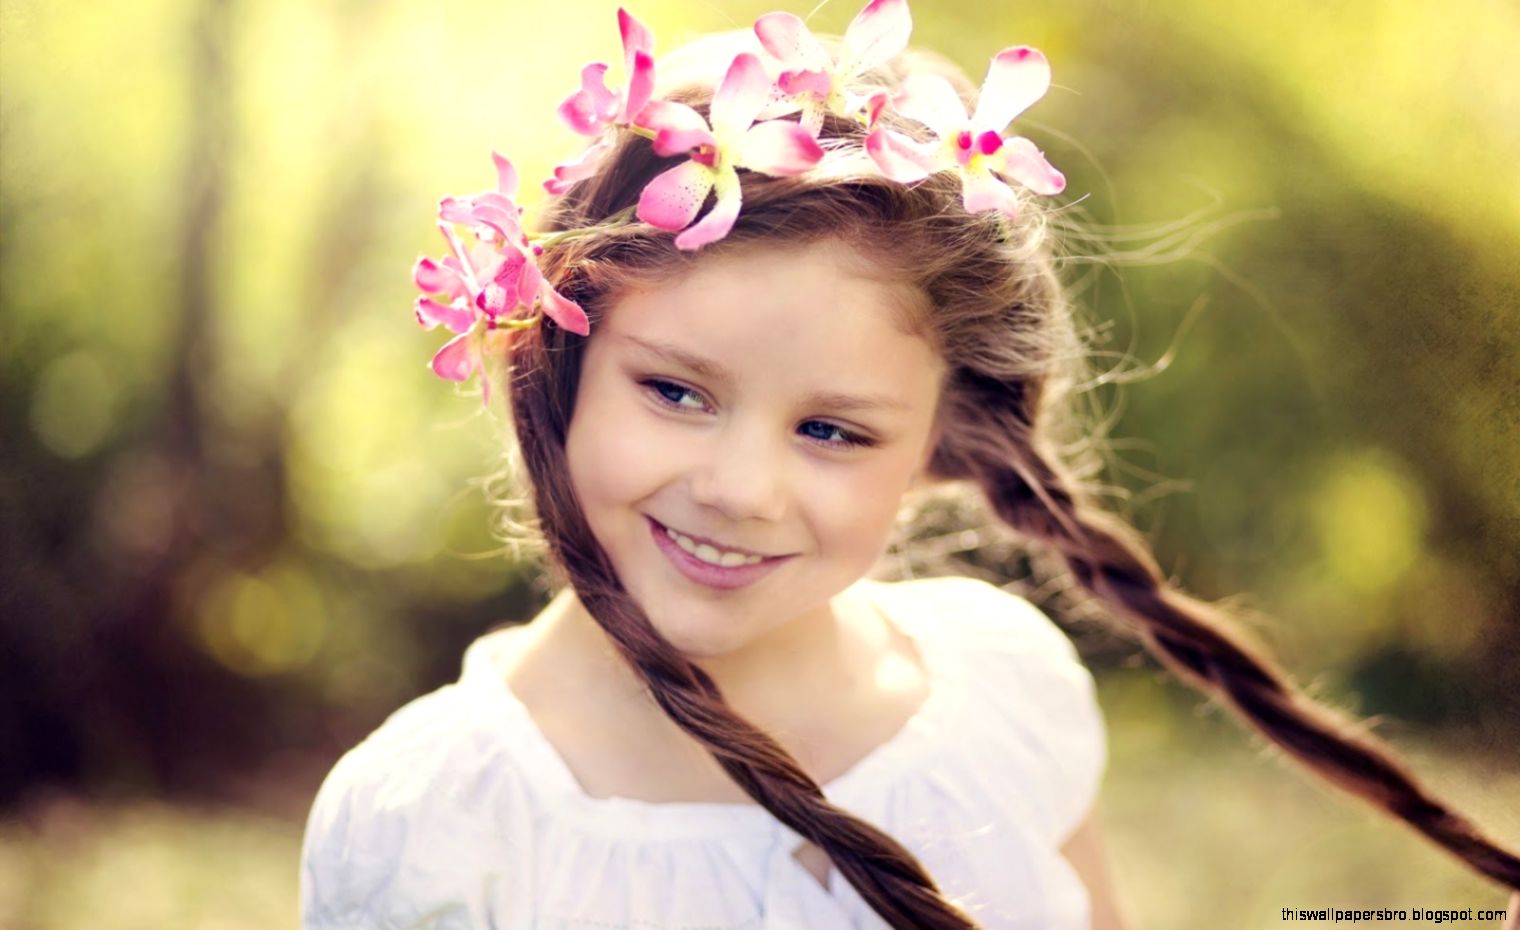 Cute Girl Smile Wallpapers This Wallpapers